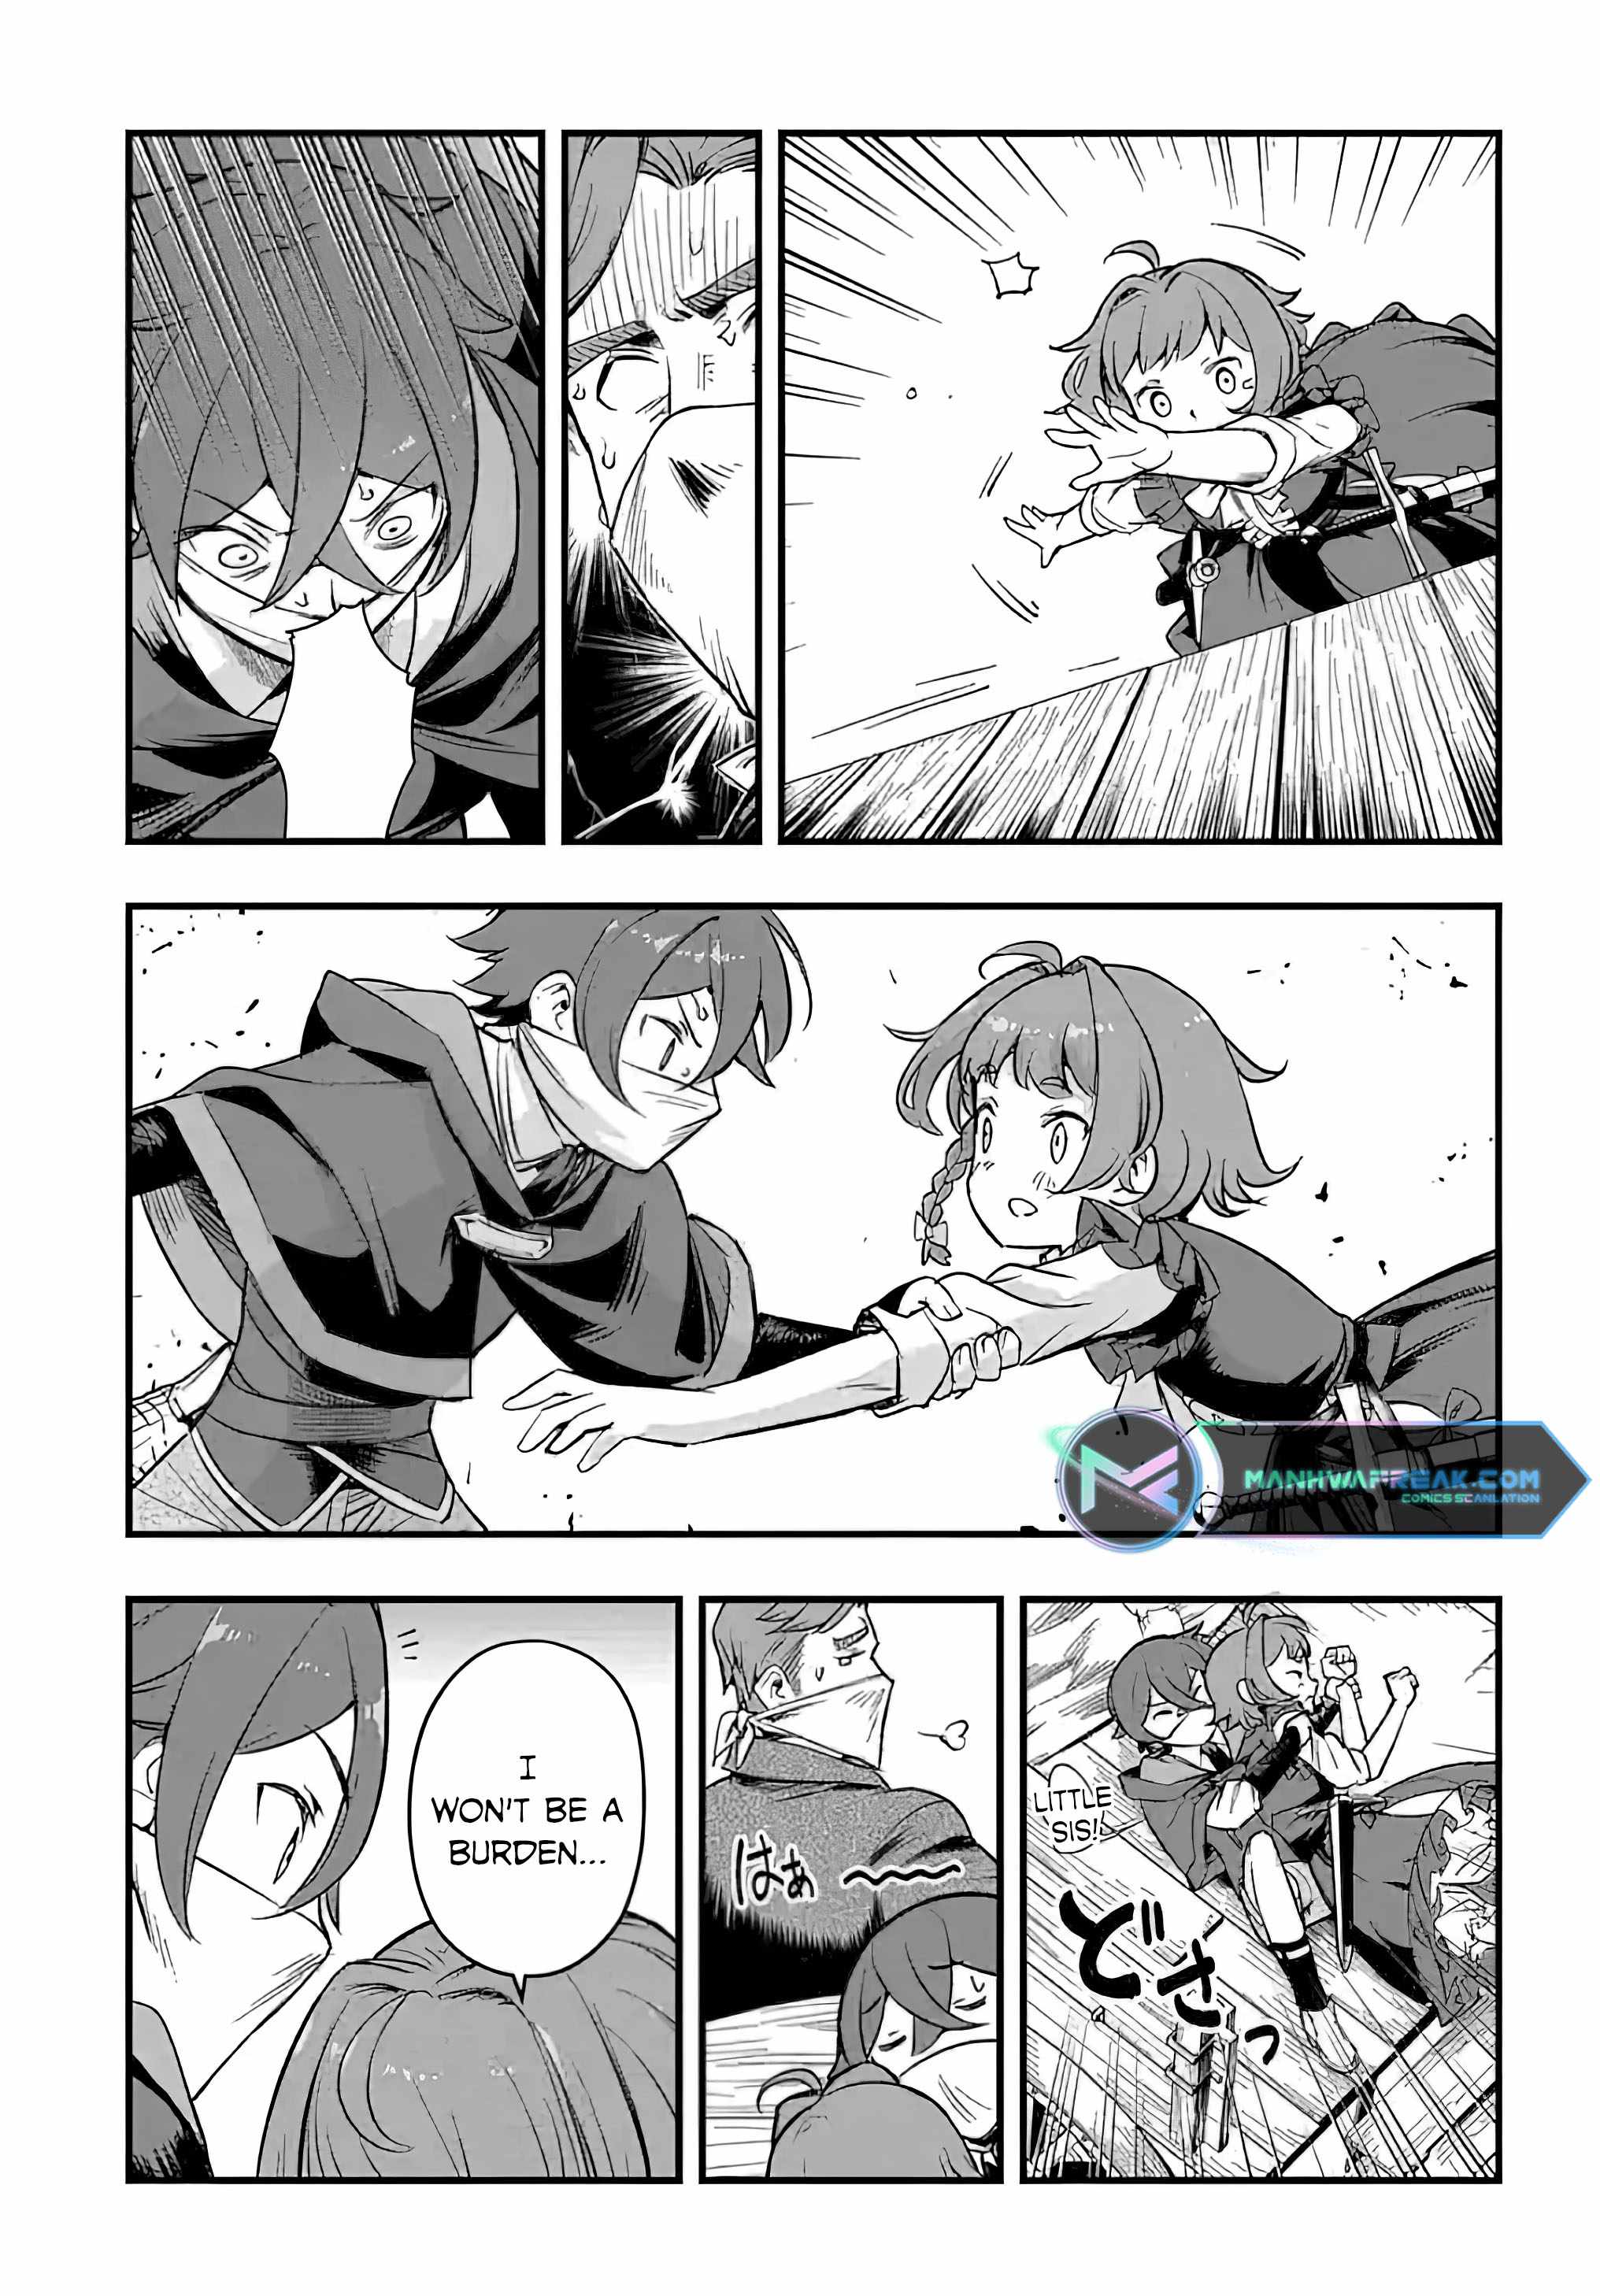 Magic Maker: How to Create Magic in Another World Chapter 13-1-eng-li - Page 12